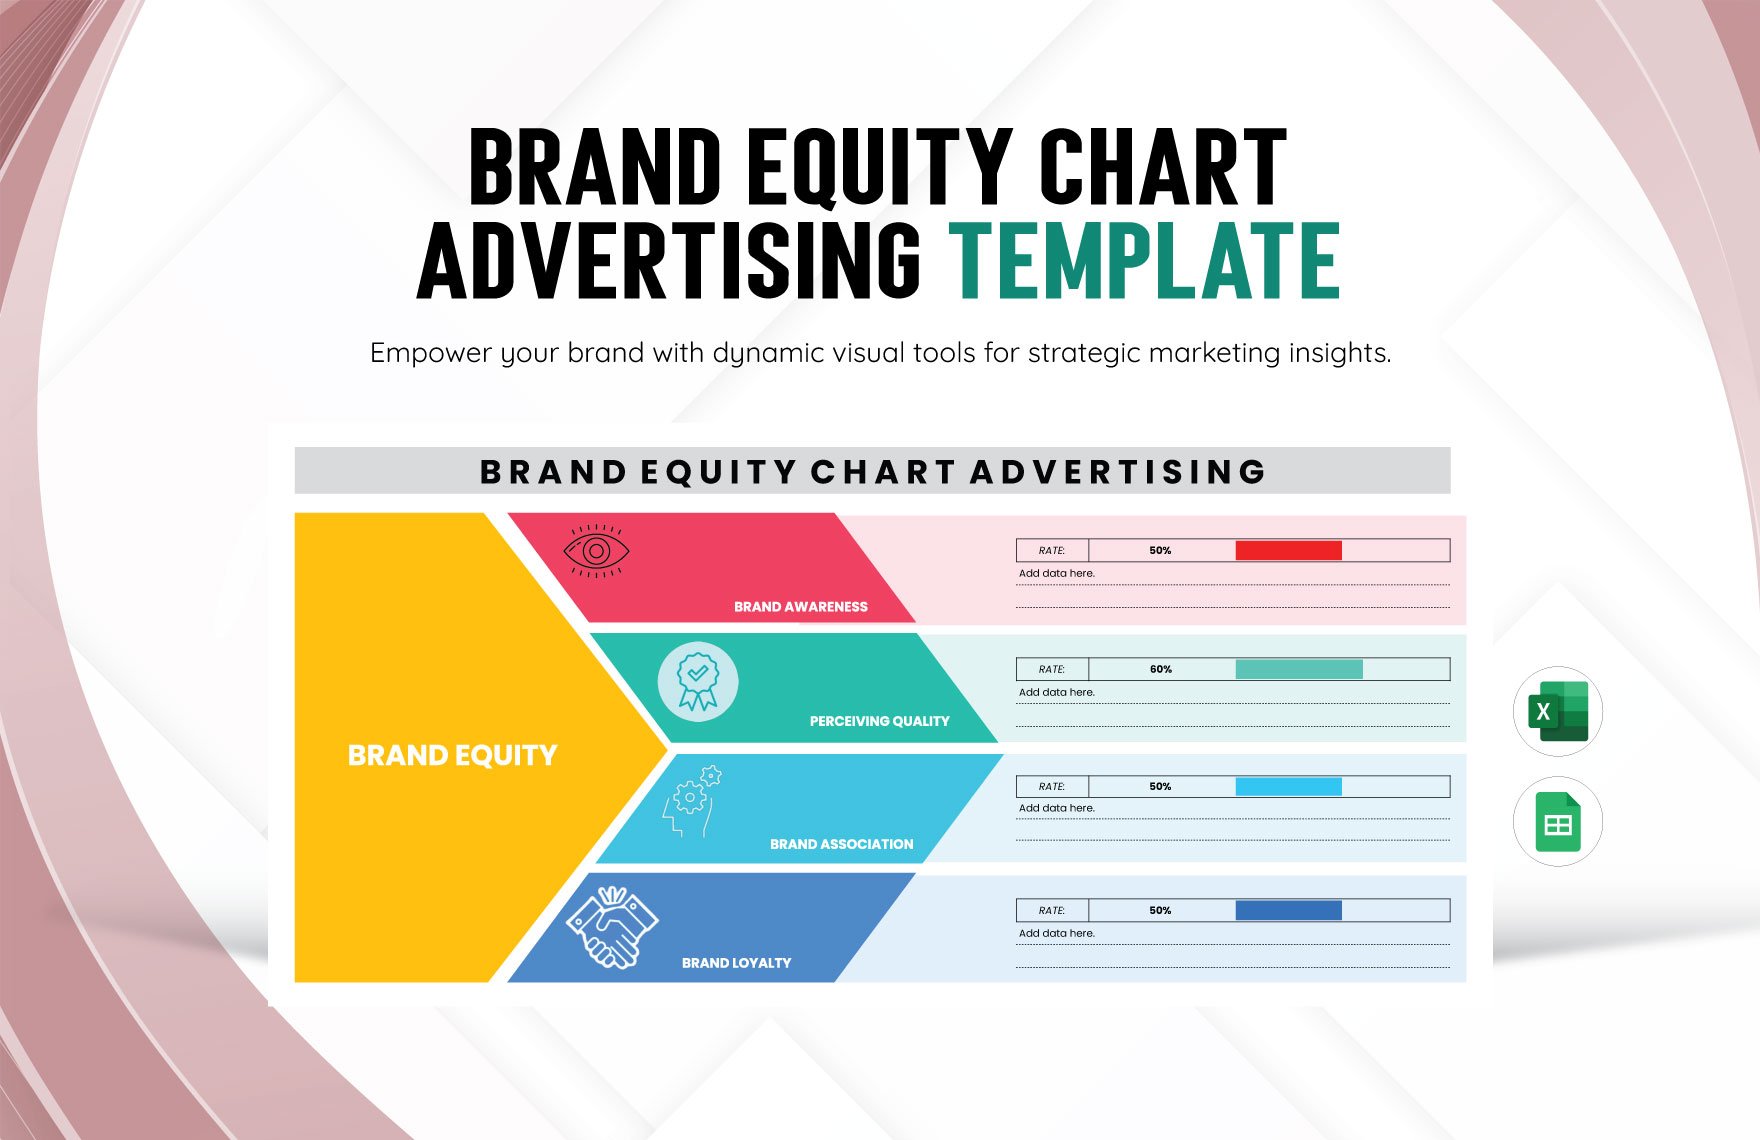 Brand Equity Chart Advertising Template in Excel, Google Sheets